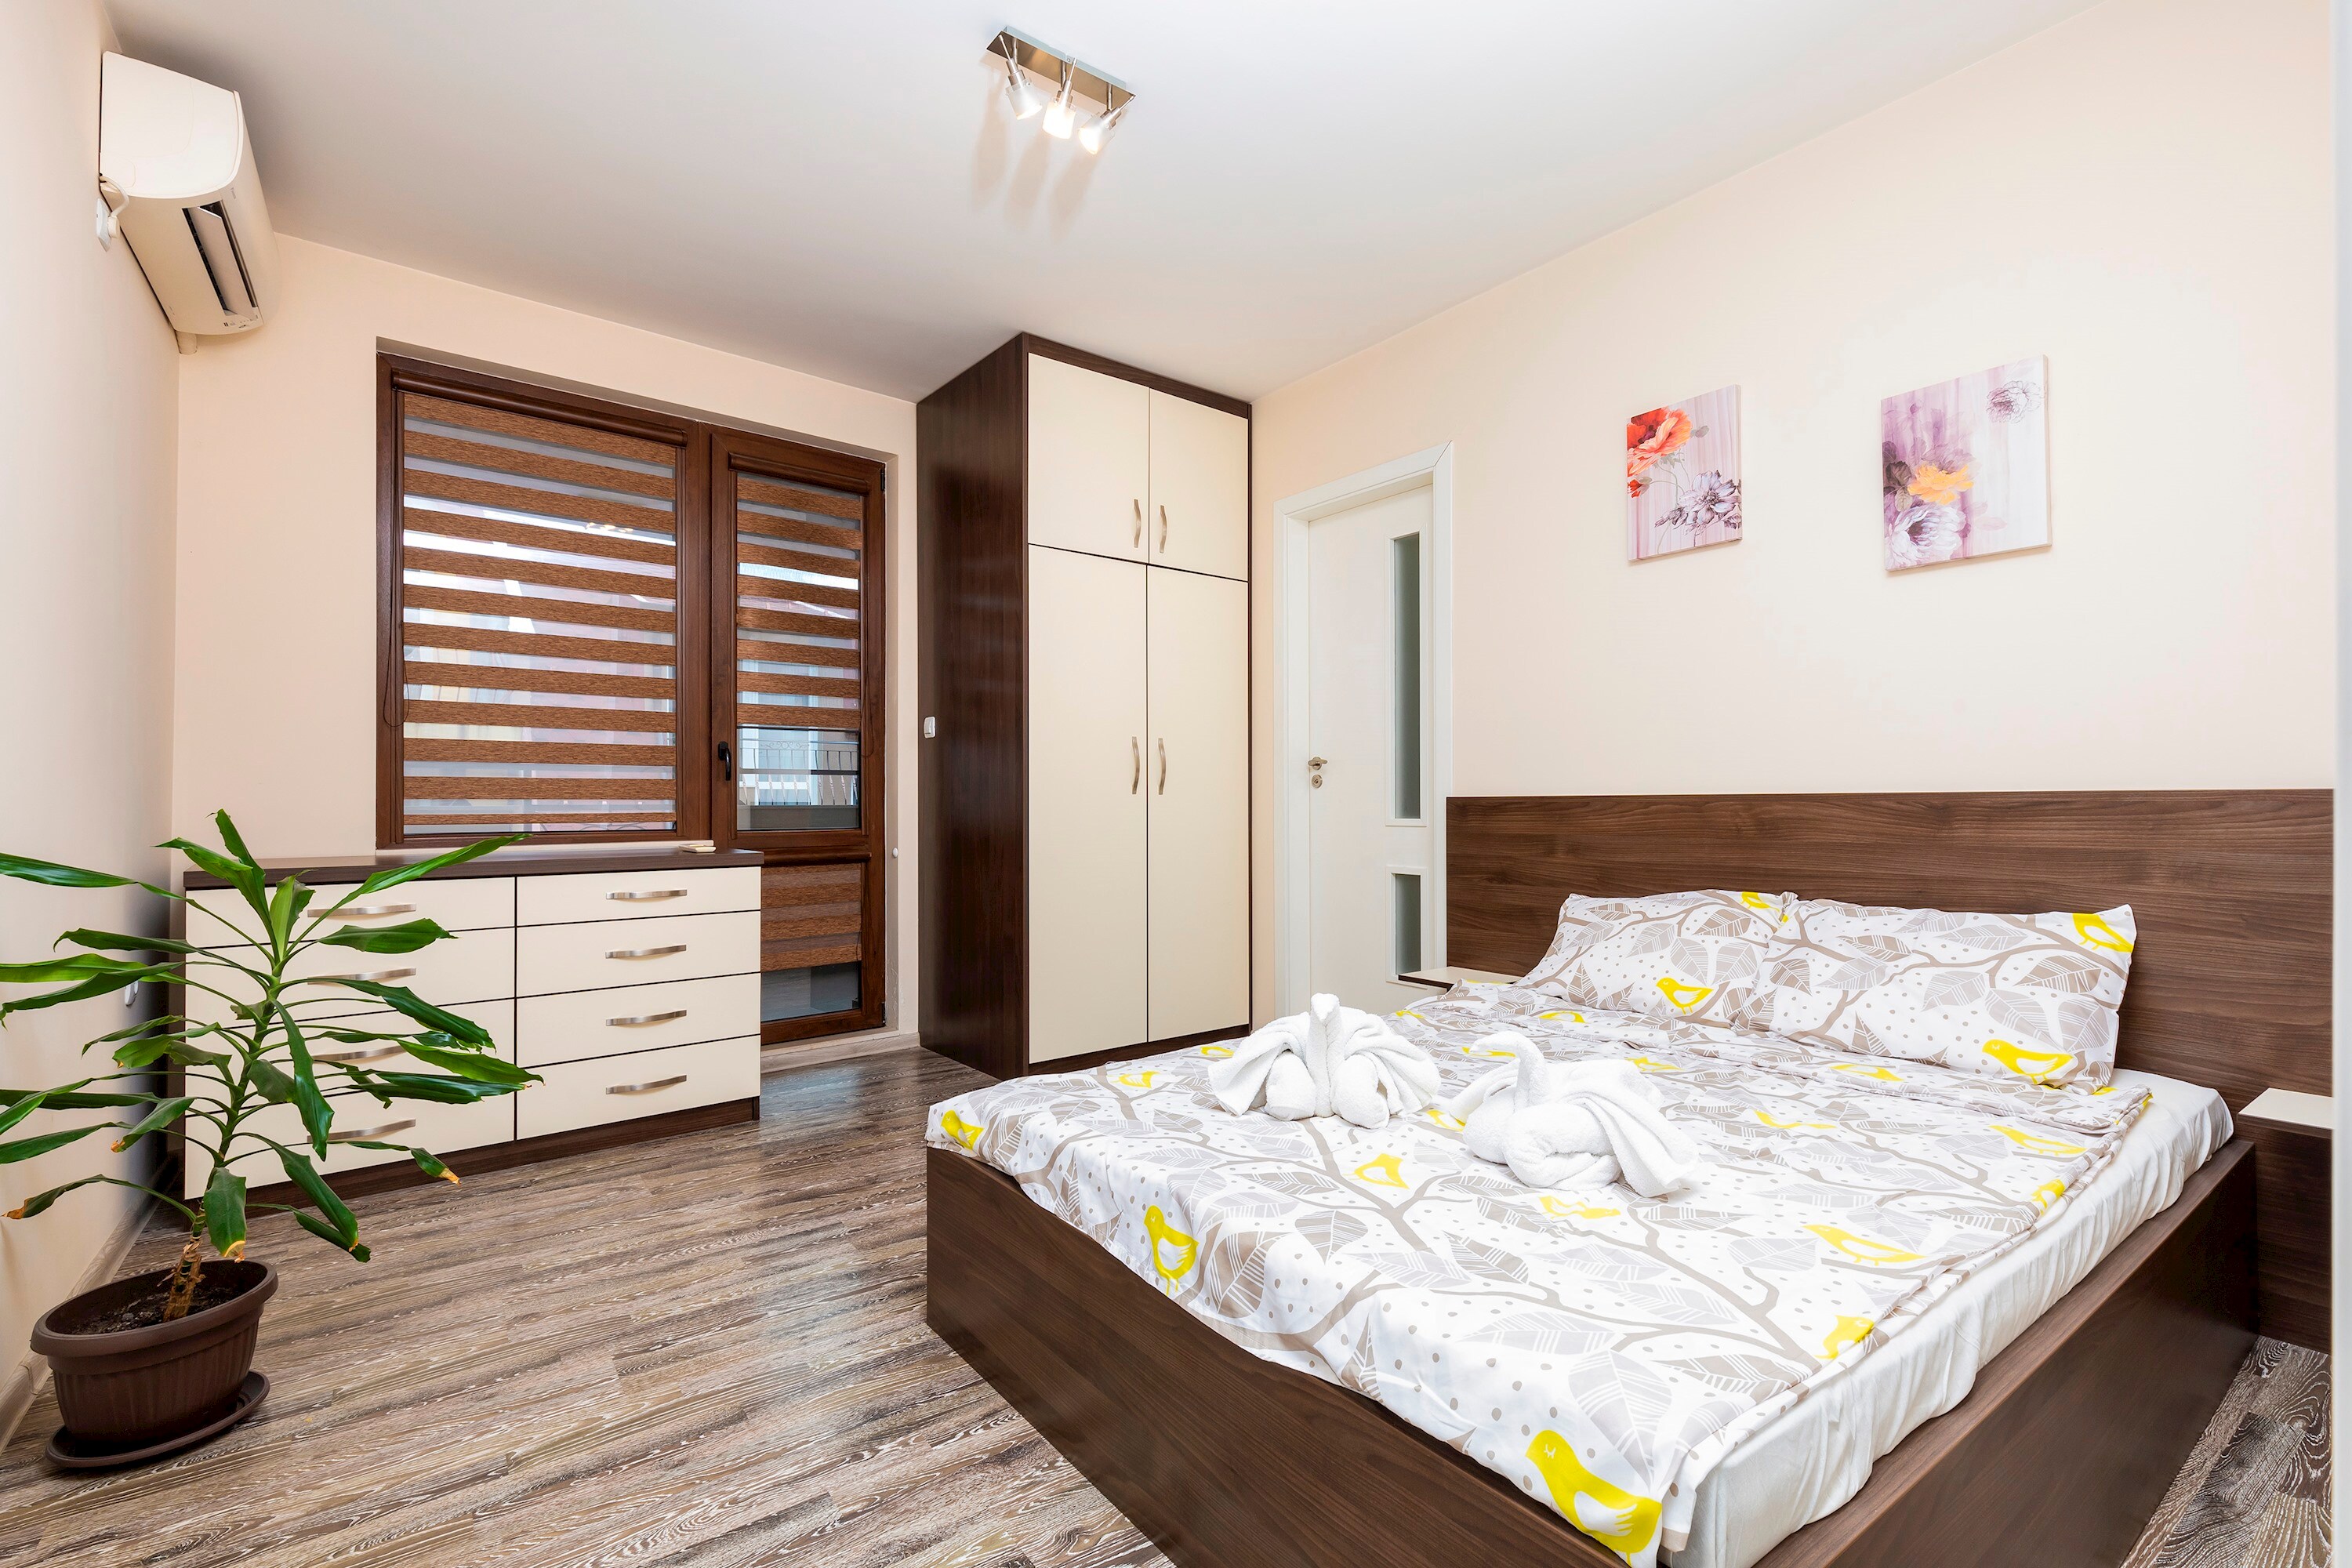 Property Image 2 - Charming flat with a lovely terrace in the centre of Plovdiv